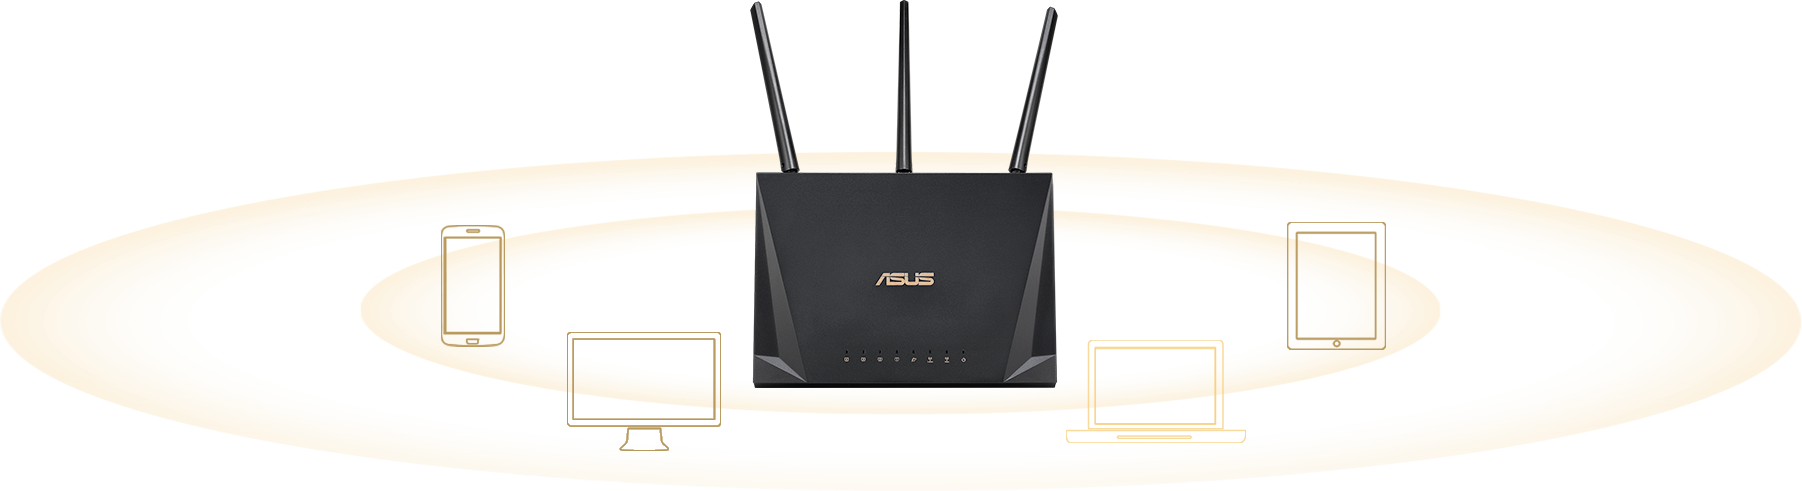 ASUS RT-AC2600 comes with Multi-user MIMO, allowing RT-AC2600 to serve multi-device at a time